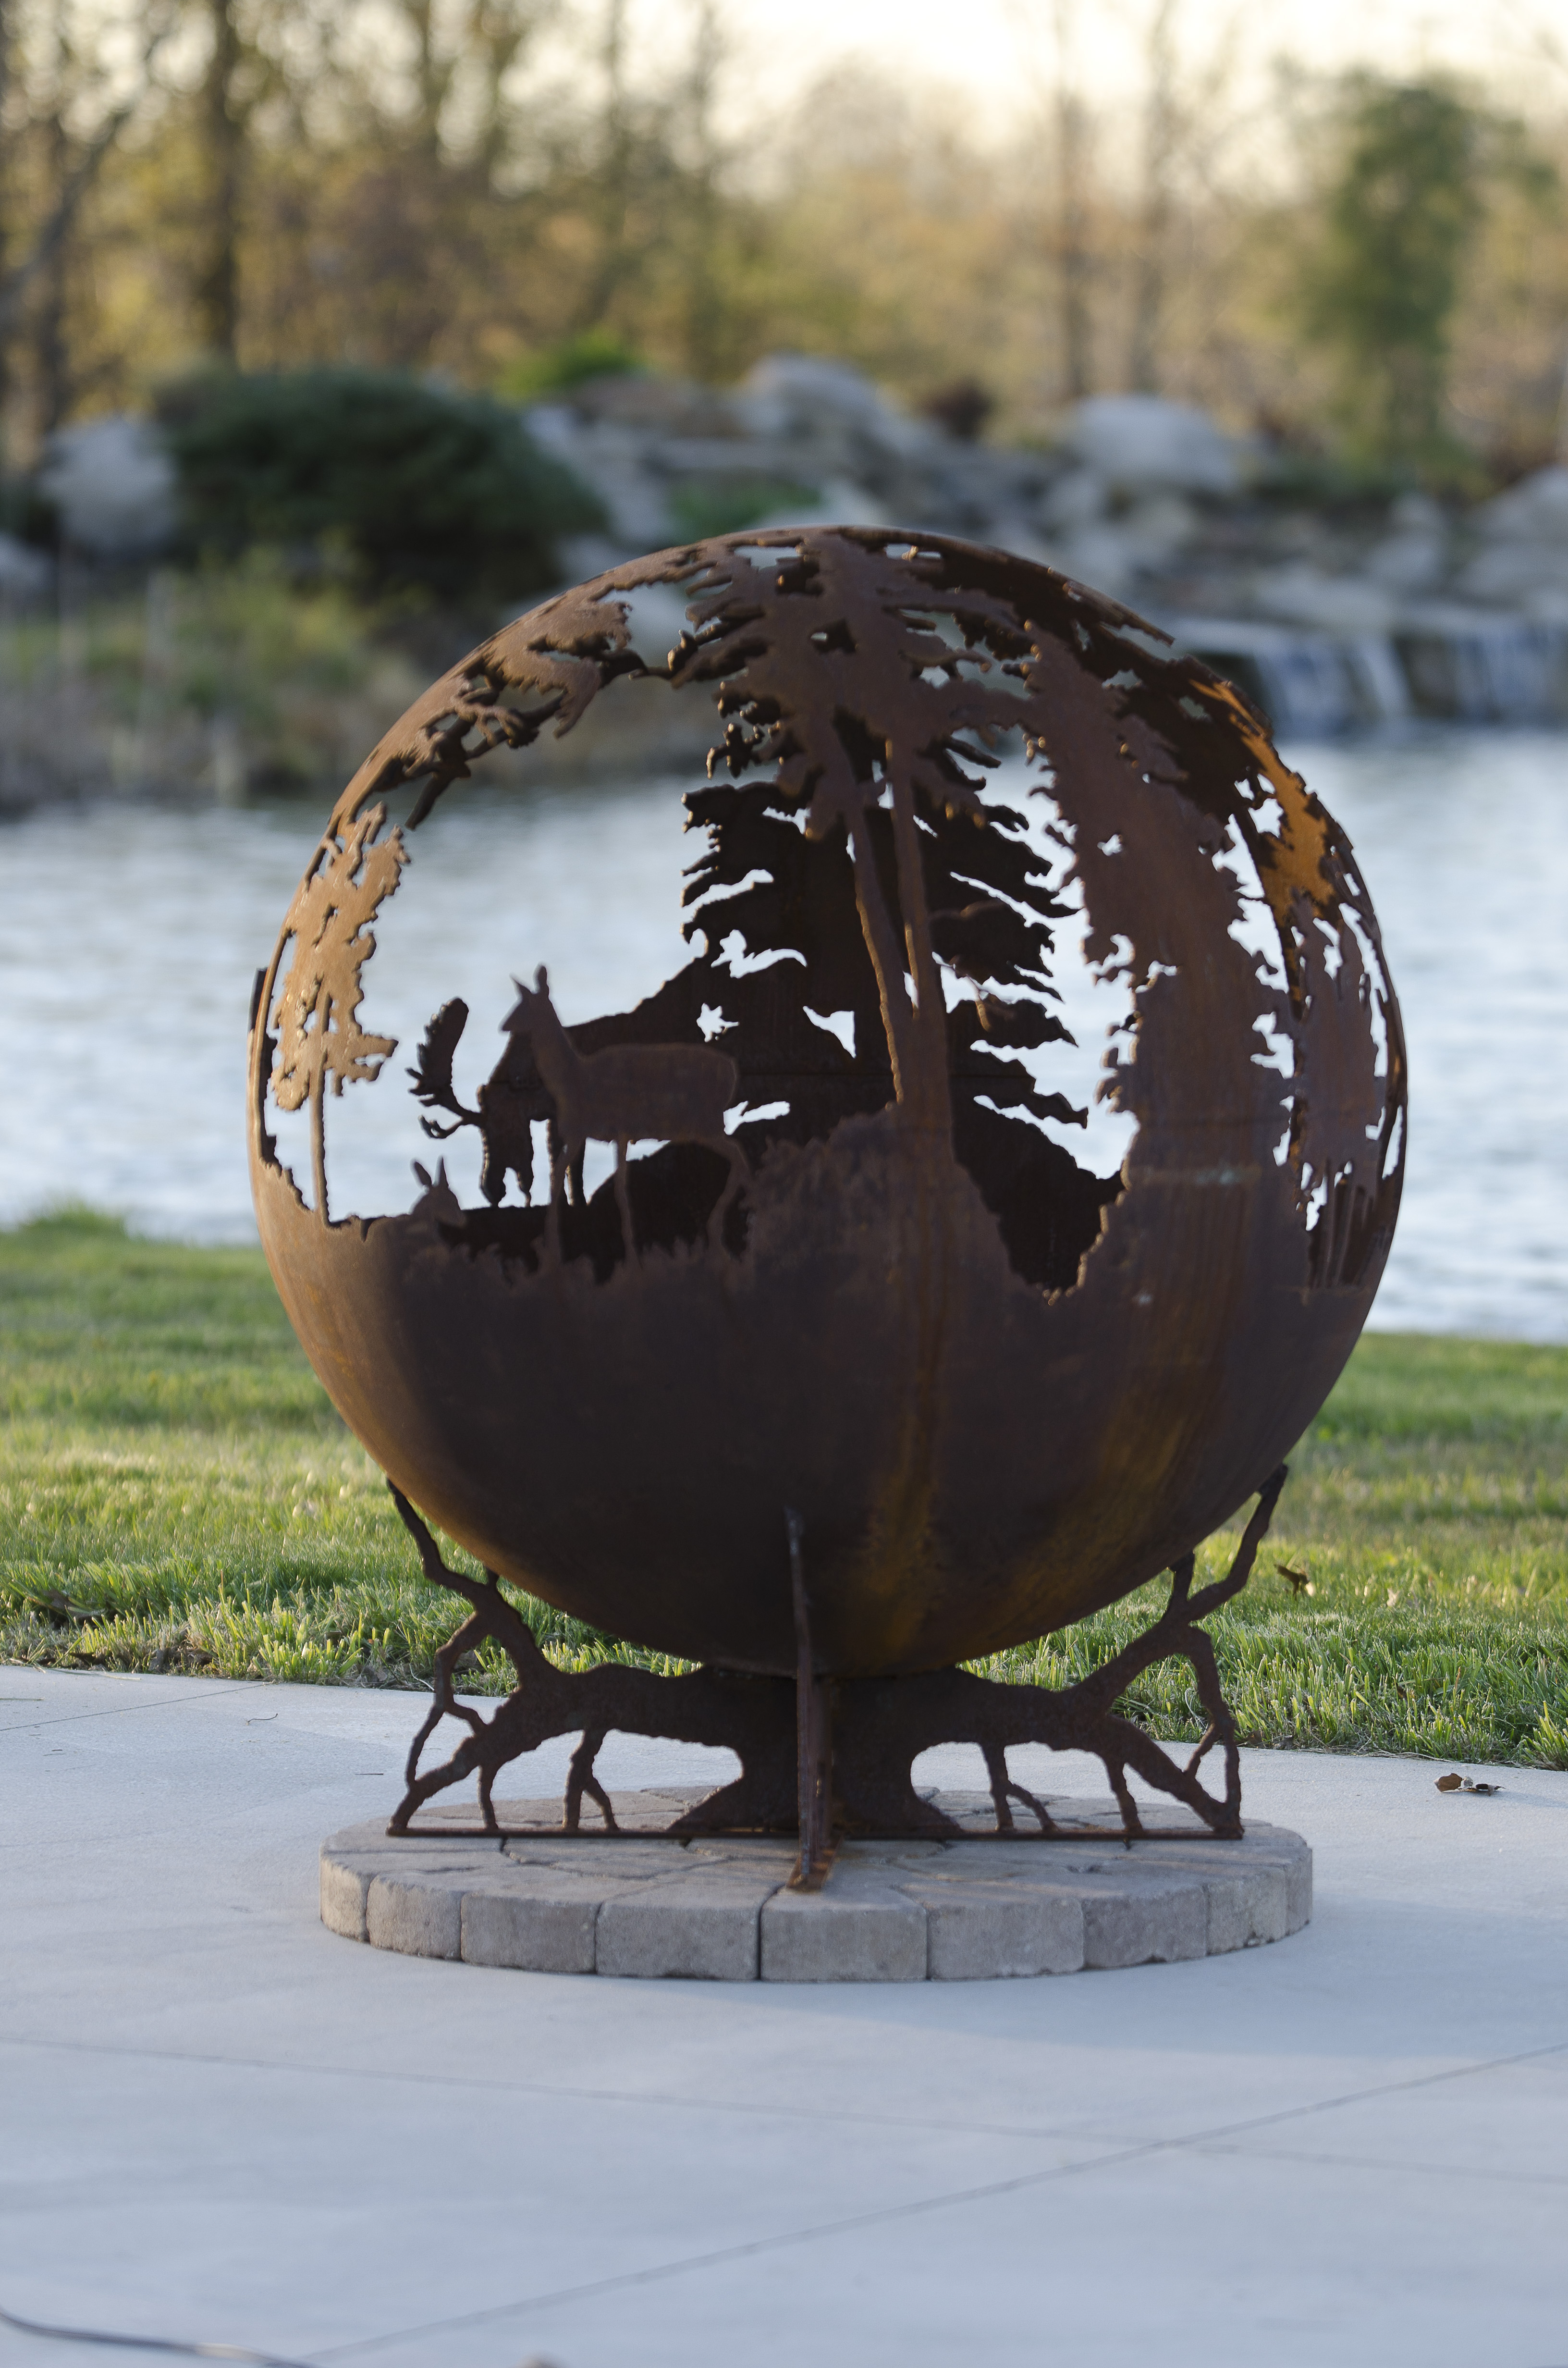 Up North Fire Pit Sphere | The Fire Pit Gallery